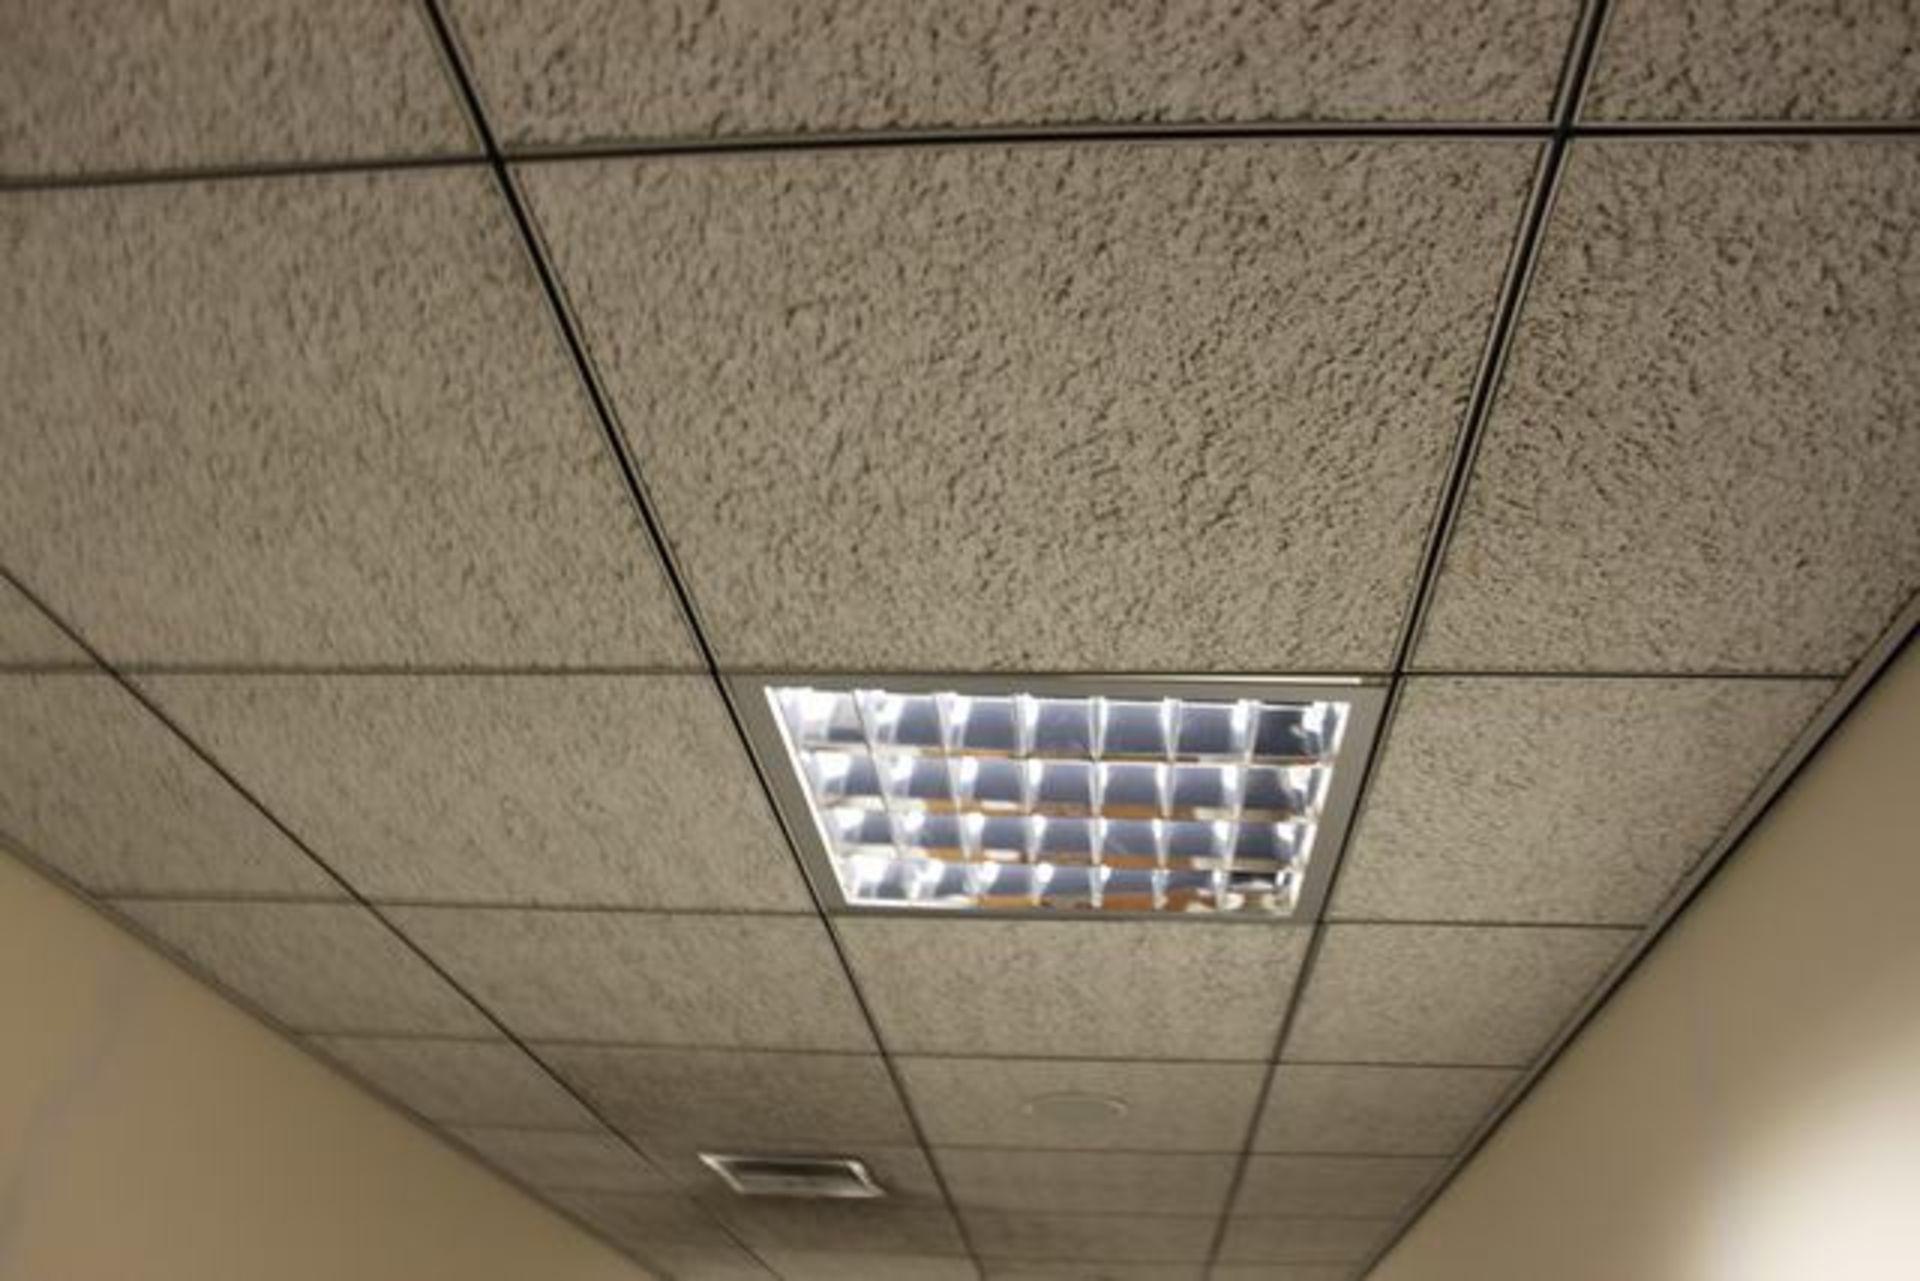 9 x square luminaire light ceiling panel powder coated steel with aluminium reflector >>Lift out